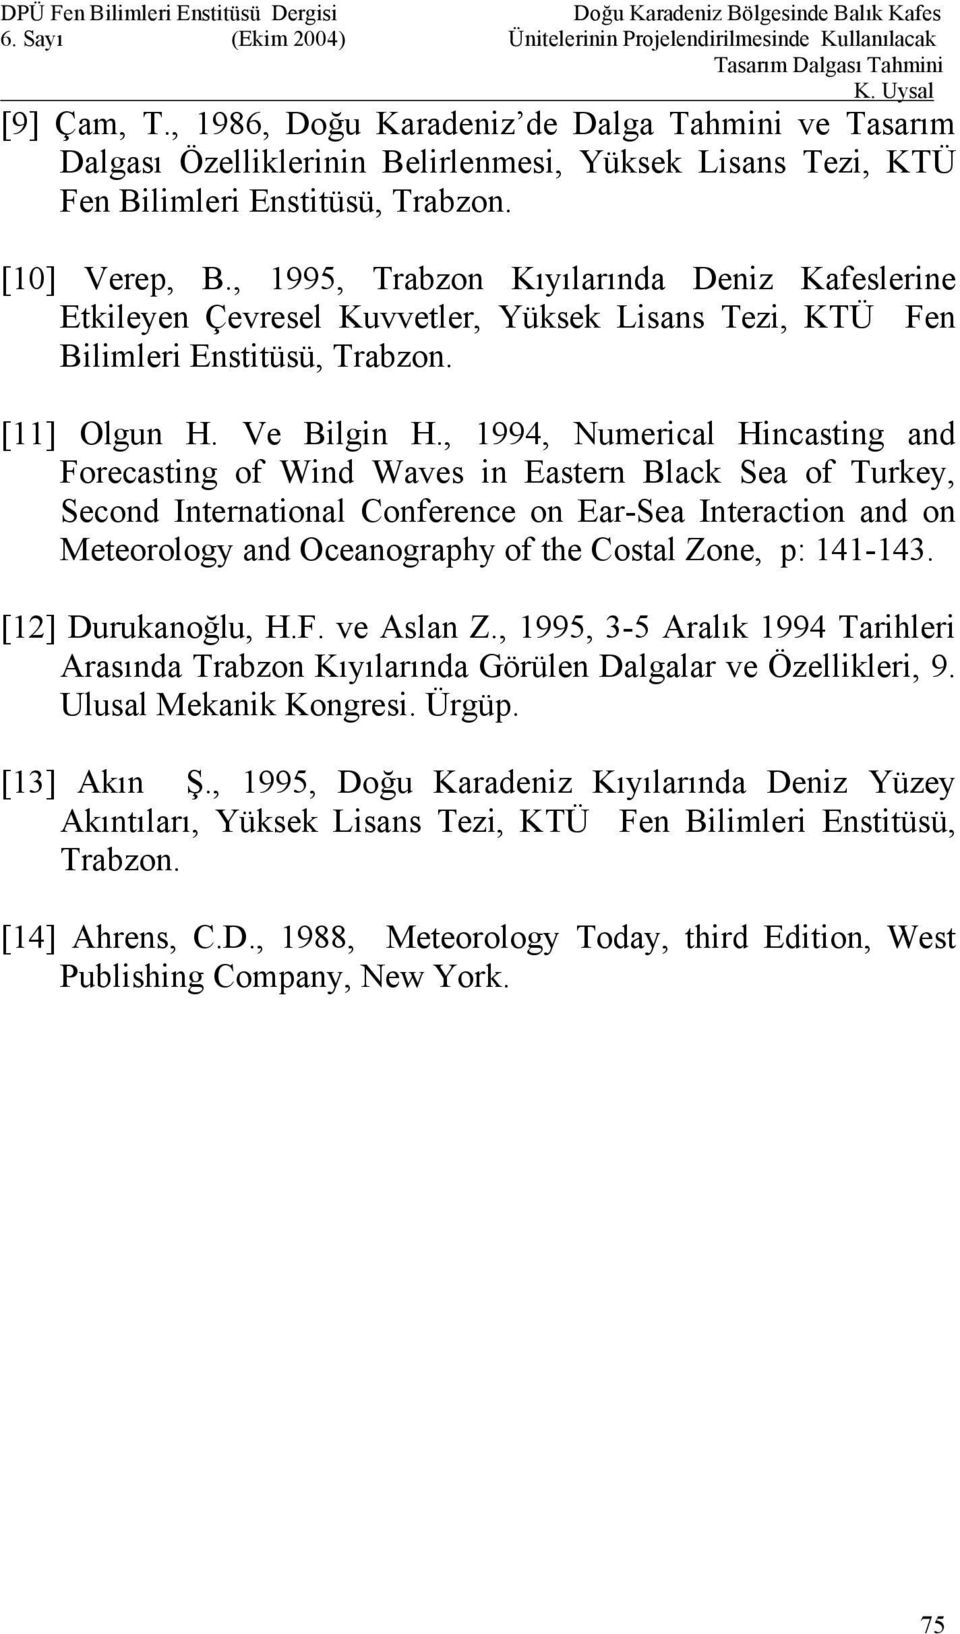 , 1994, Numerical Hincasting and Forecasting of Wind Waves in Eastern Black Sea of Turkey, Second International Conference on Ear-Sea Interaction and on Meteorology and Oceanography of the Costal